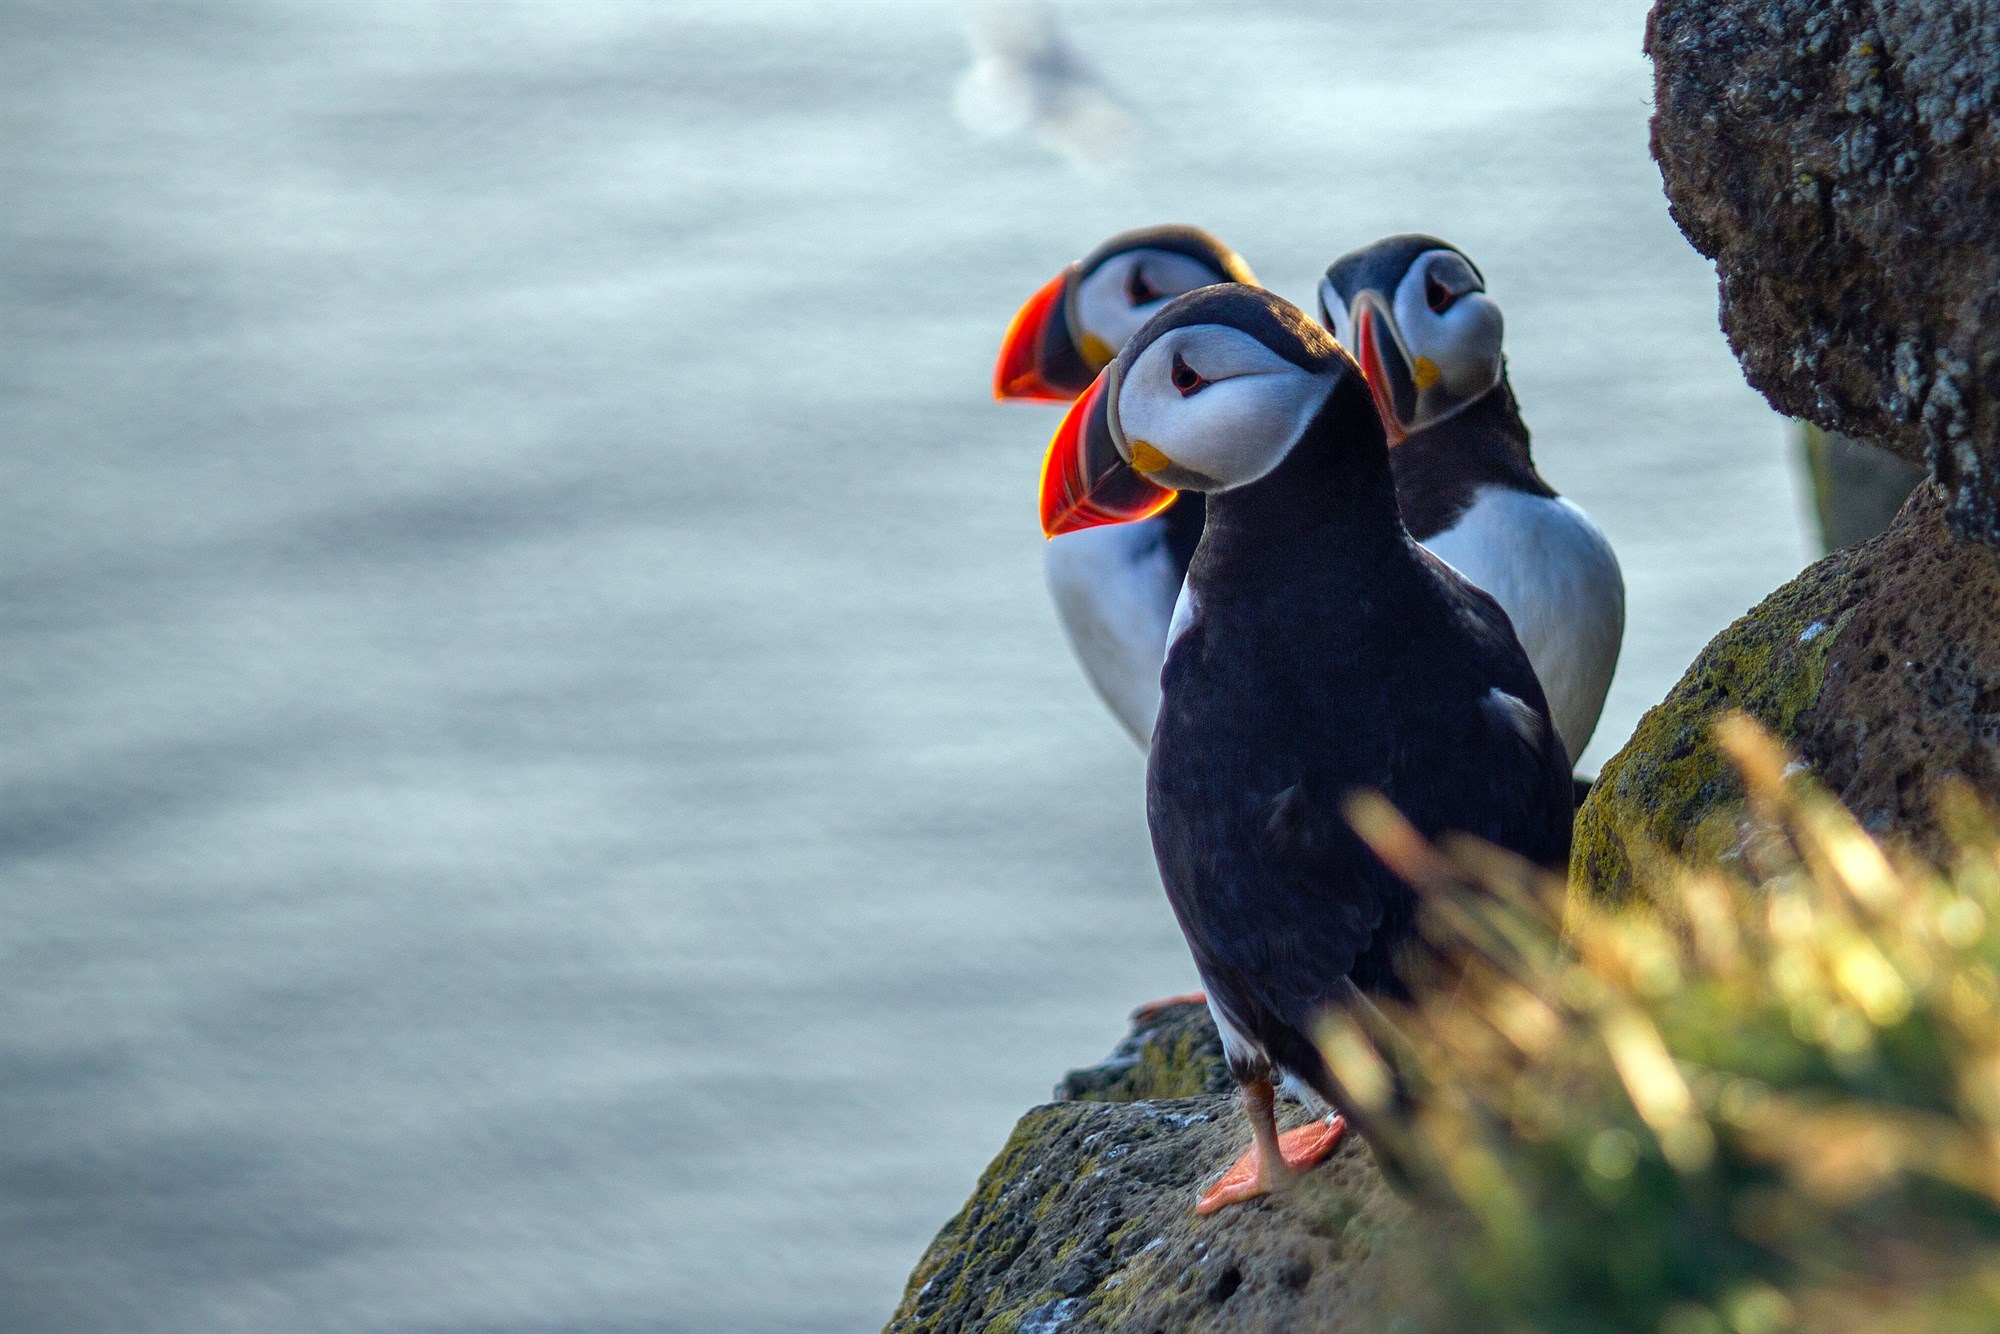 Group of puffins stood on rocky outcrop in Iceland.